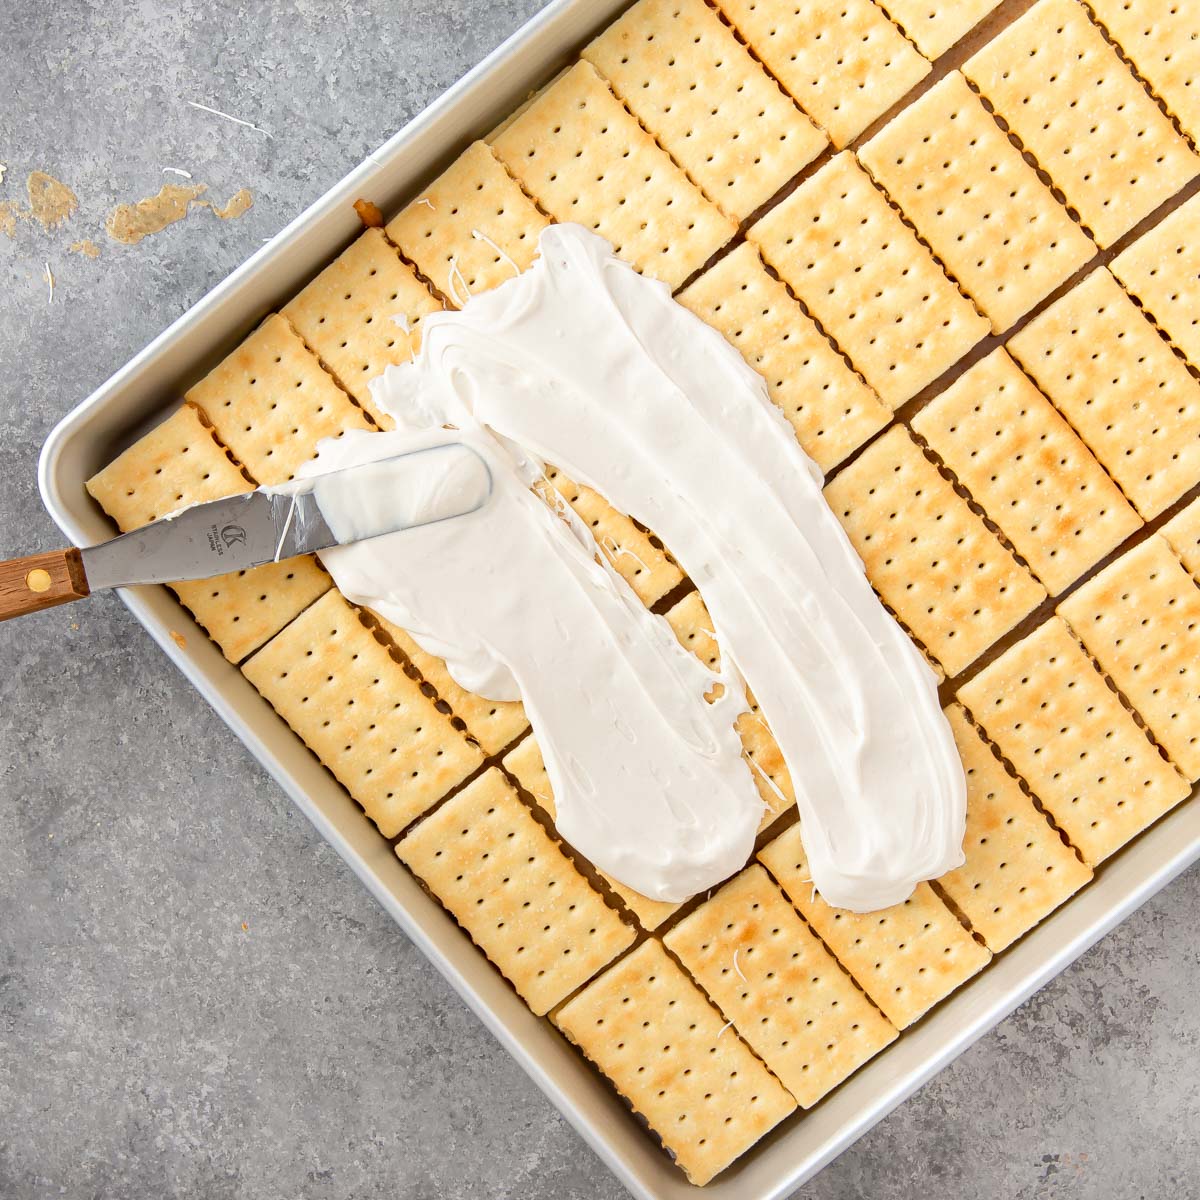 spreading melted white chocolate on toffee bars